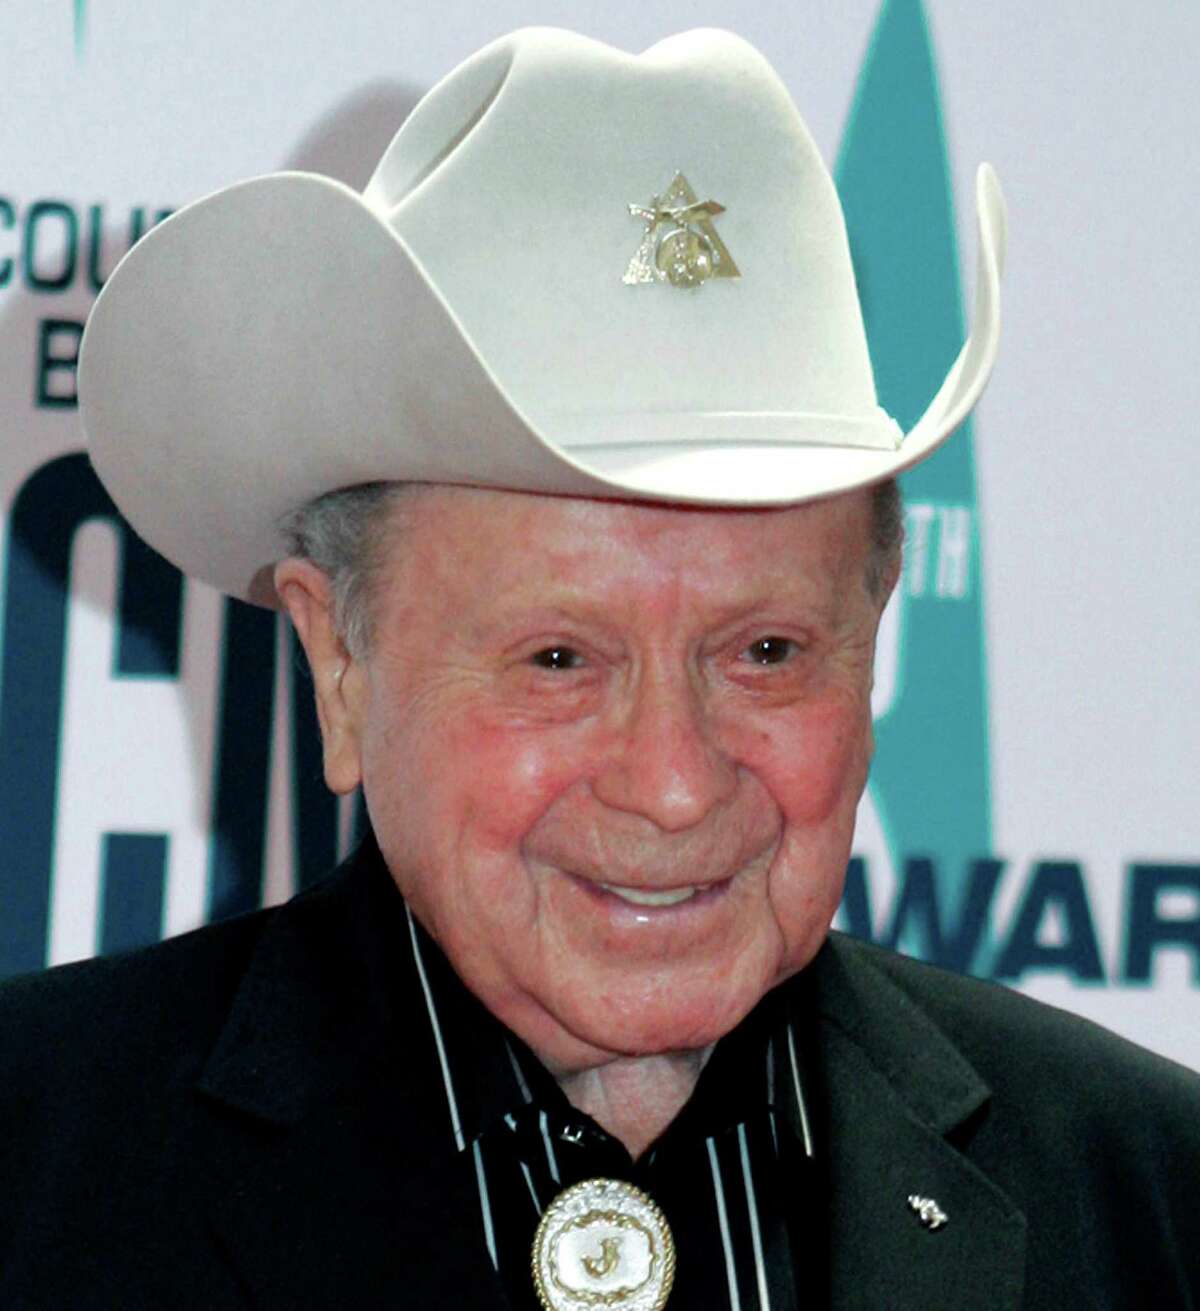 FILE - In this Nov. 6, 2006 file photo, Grand Ole Opry star Little Jimmy Dickens arrives at the 40th Annual CMA Awards in Nashville, Tenn. Dickens has been hospitalized with an undisclosed illness. Jessie Schmidt, a publicist for the Opry, said in a news release Sunday, Dec. 28, 2014, that Dickens was admitted to a Nashville-area hospital on Dec. 25 and that he's in "critical care." (AP Photo/Chitose Suzuki, File)